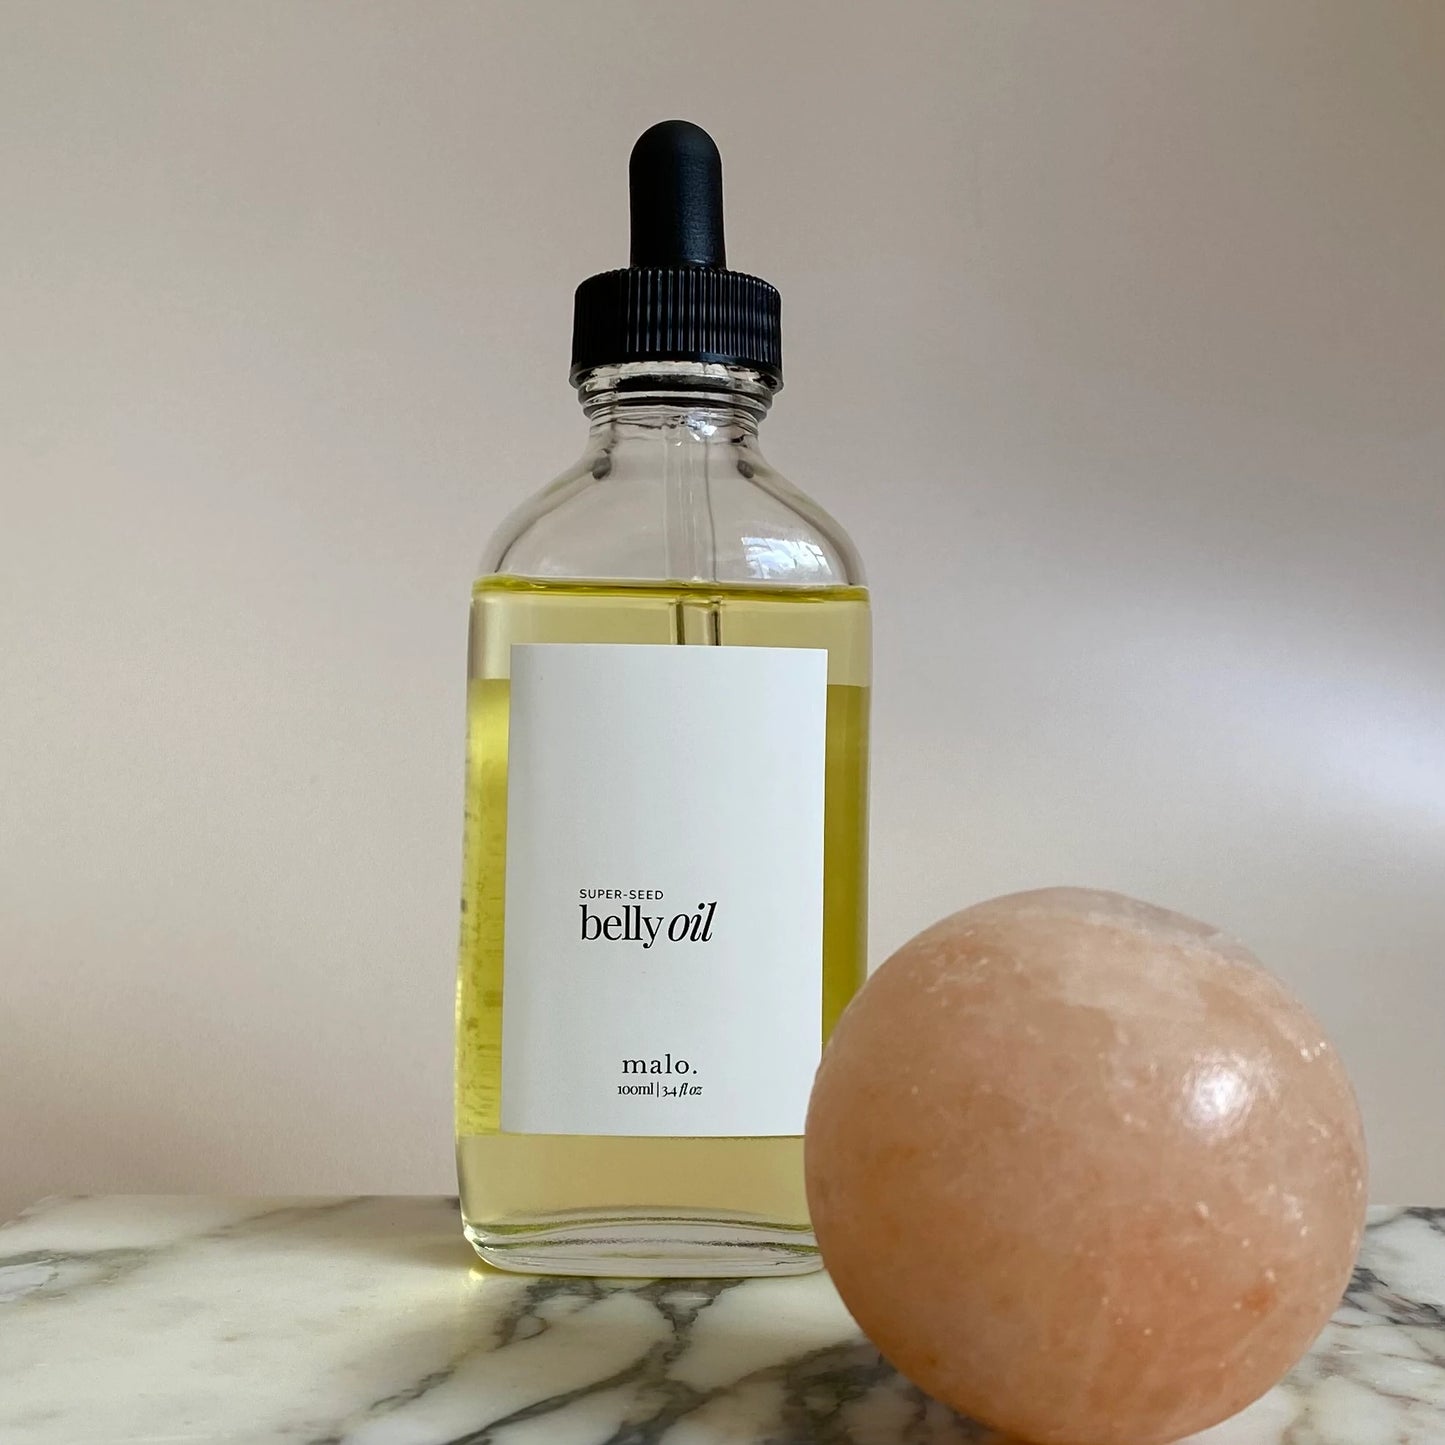 Malo - Super-Seed Belly oil